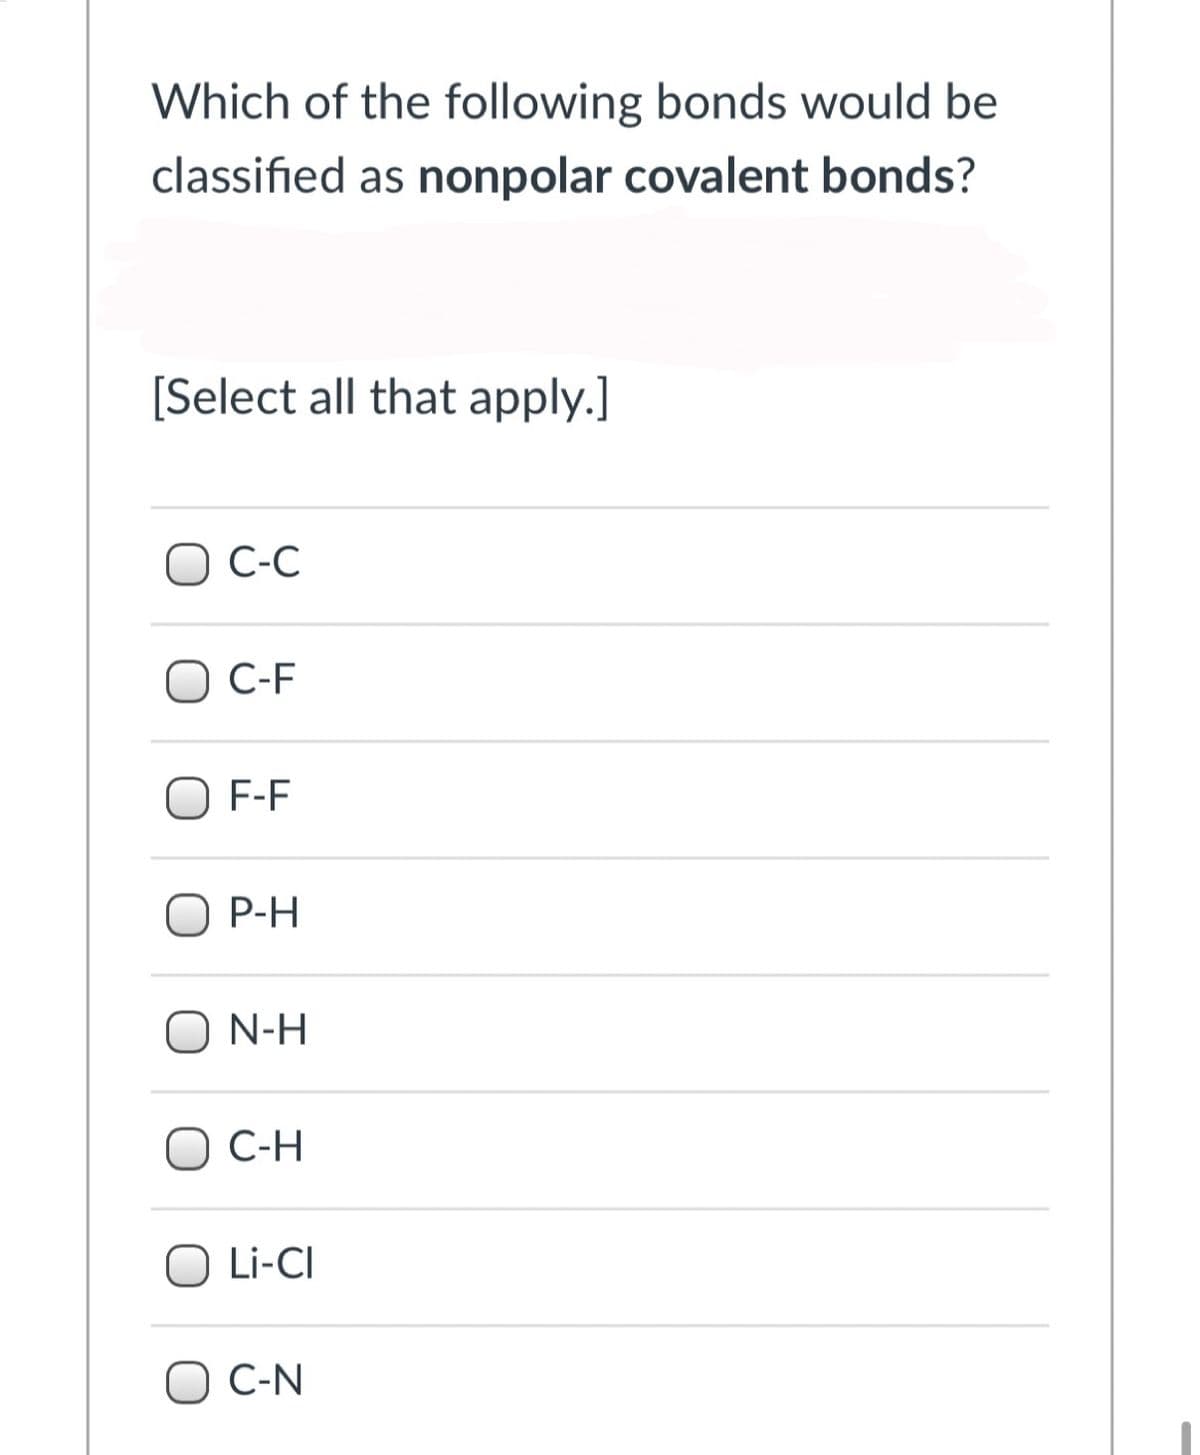 Which of the following bonds would be
classified as nonpolar covalent bonds?
[Select all that apply.]
O C-C
O C-F
O F-F
O P-H
O N-H
O C-H
O Li-CI
O C-N
